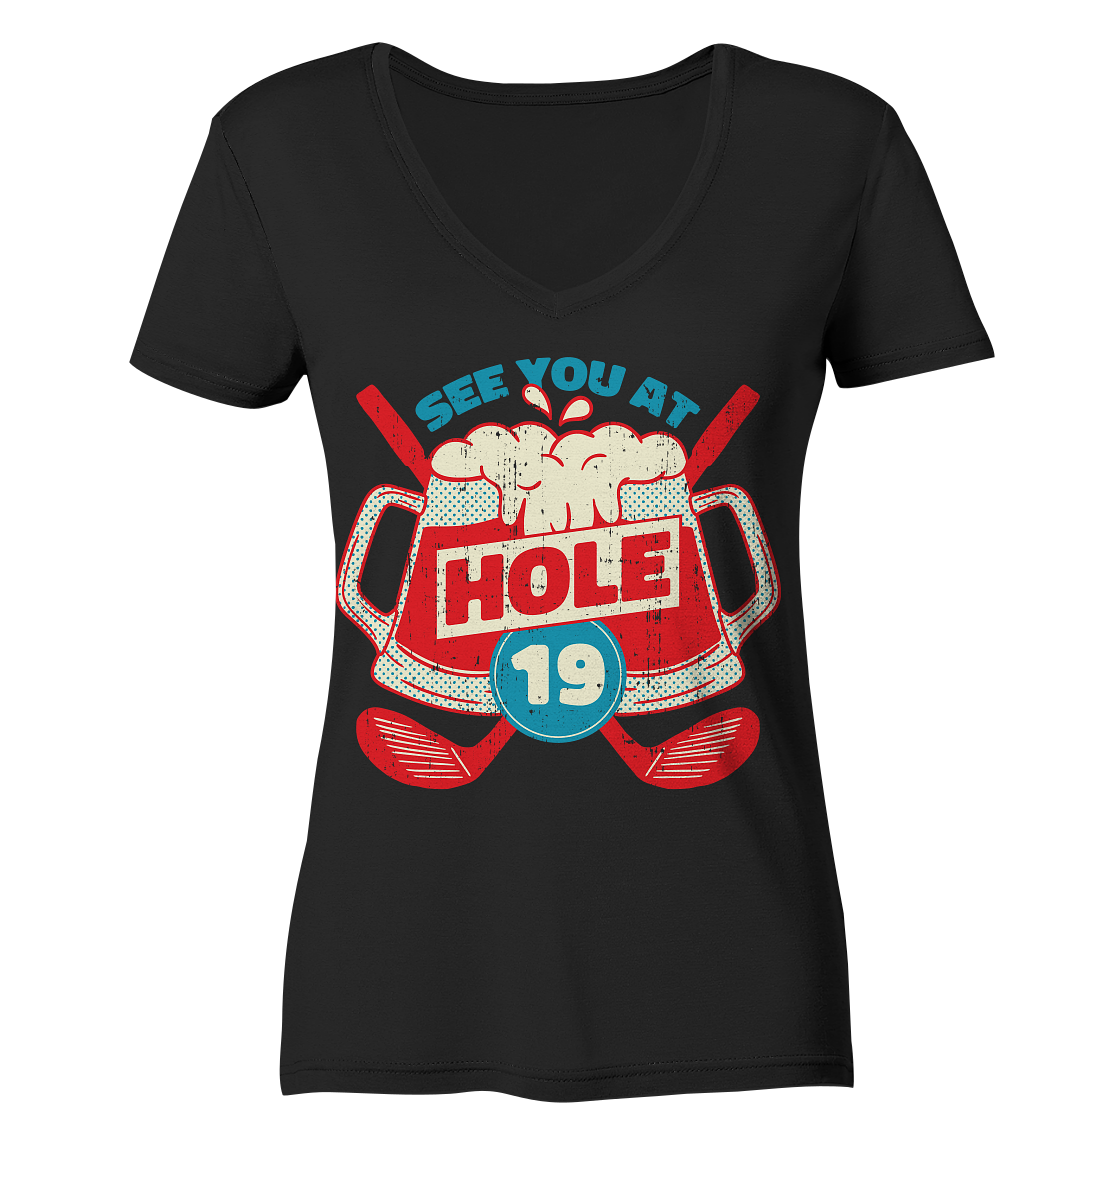 Golf ,See you at Hole 19 , Wir sehen uns bei Loch 19 - Ladies V-Neck Shirt